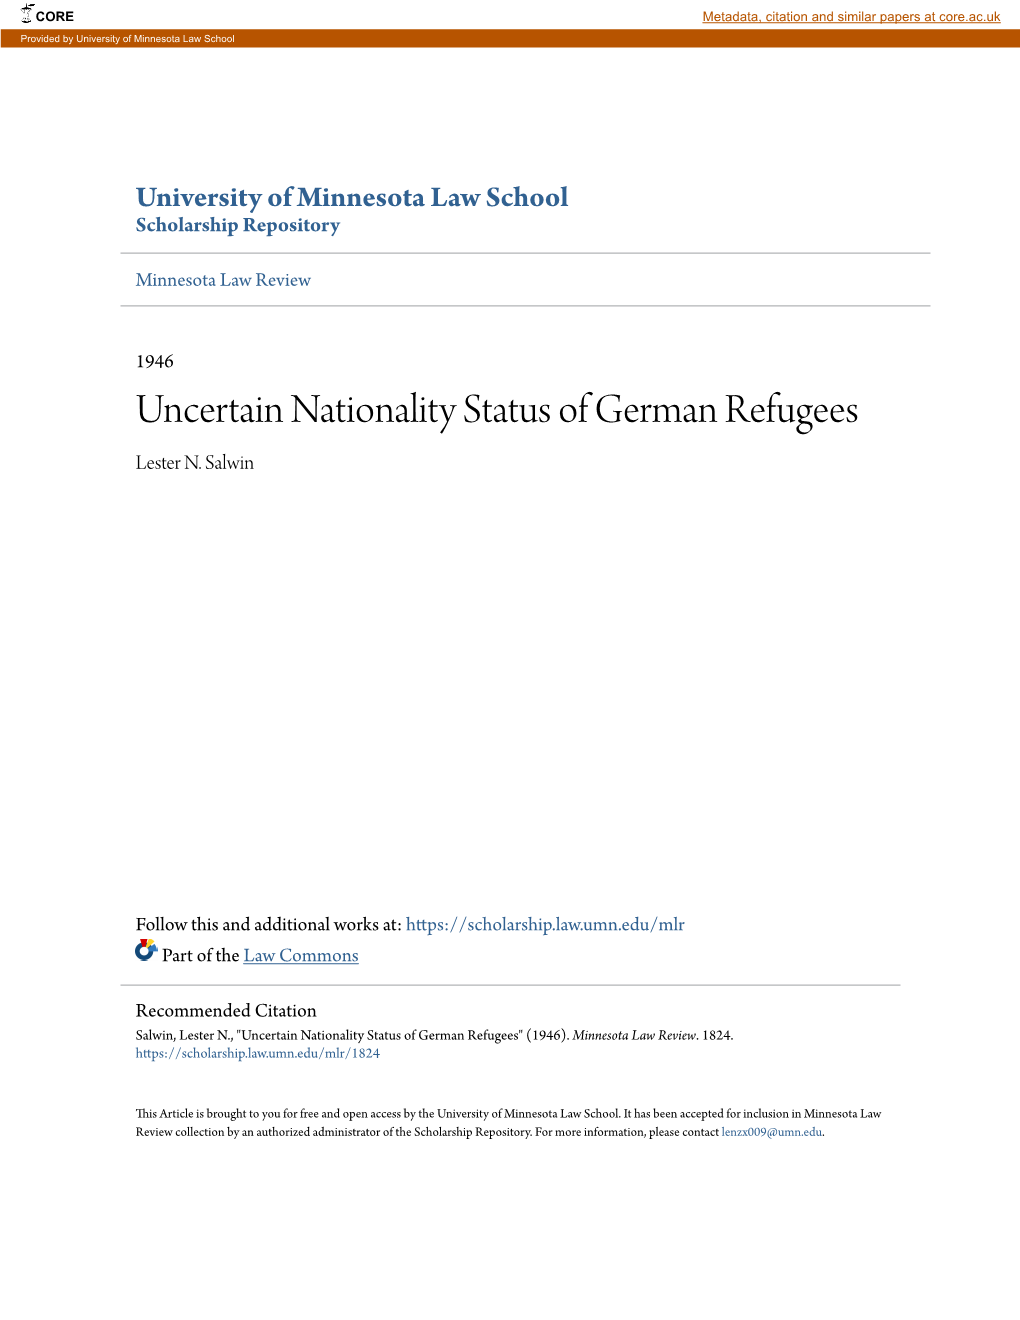 Uncertain Nationality Status of German Refugees Lester N